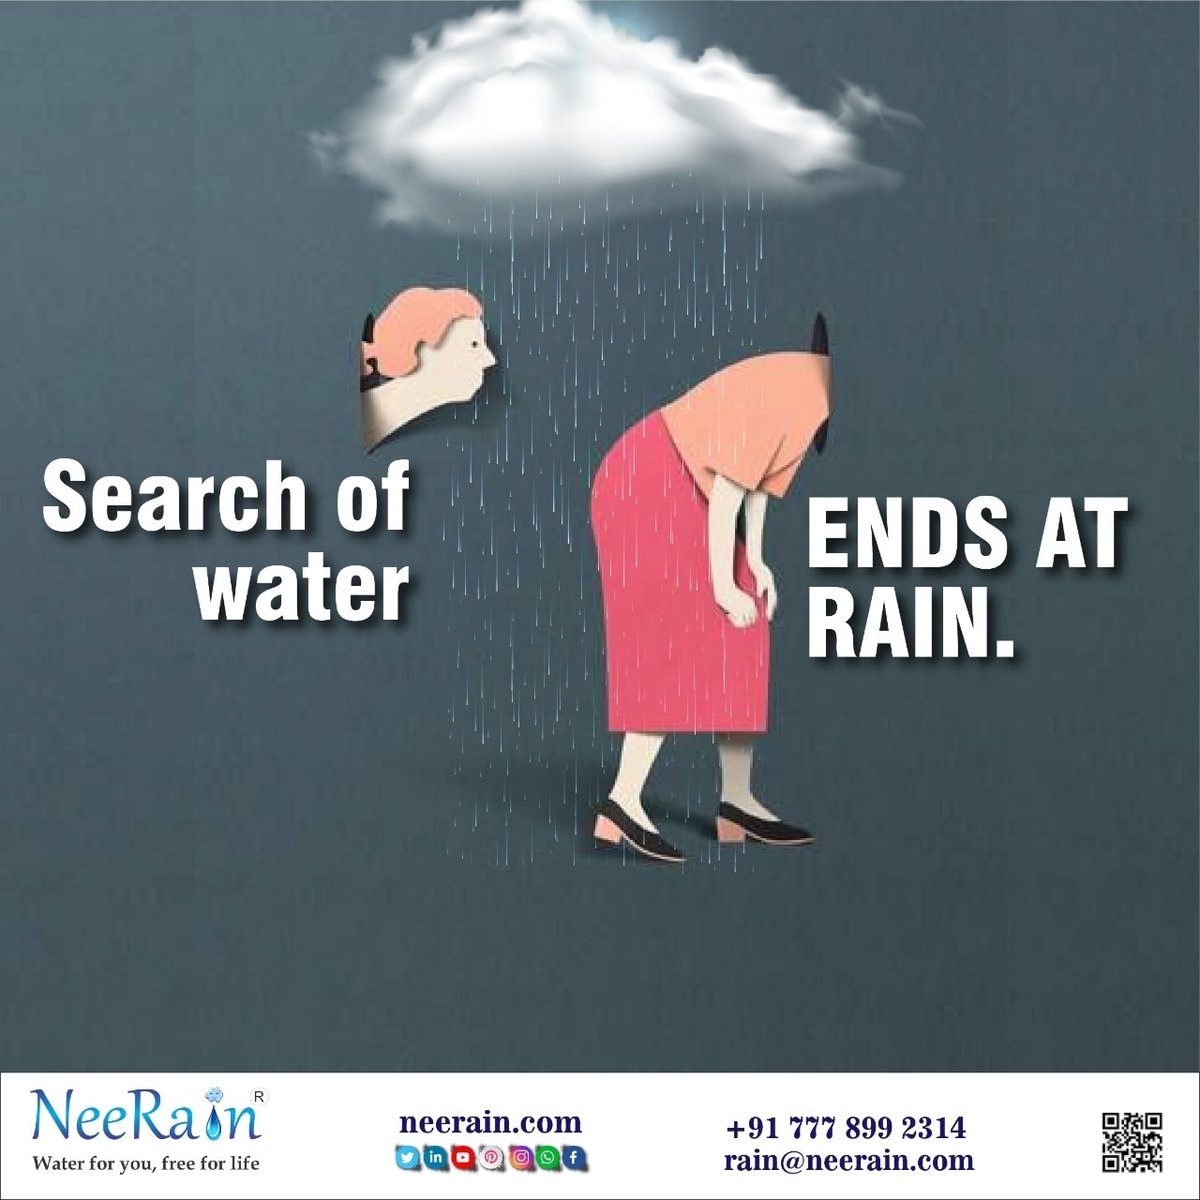 Search of water ends at rain !!

#rain #RechargeWater #RechargeRain #Water #WaterForLife #waterharvesting #WaterConservation #savewatersavelife #Sustainability #ecofriendly #greenbuilding #GroundWater #Neerain #NeeRainFilter #rainwater #WaterInnovation #watermanagement #mep